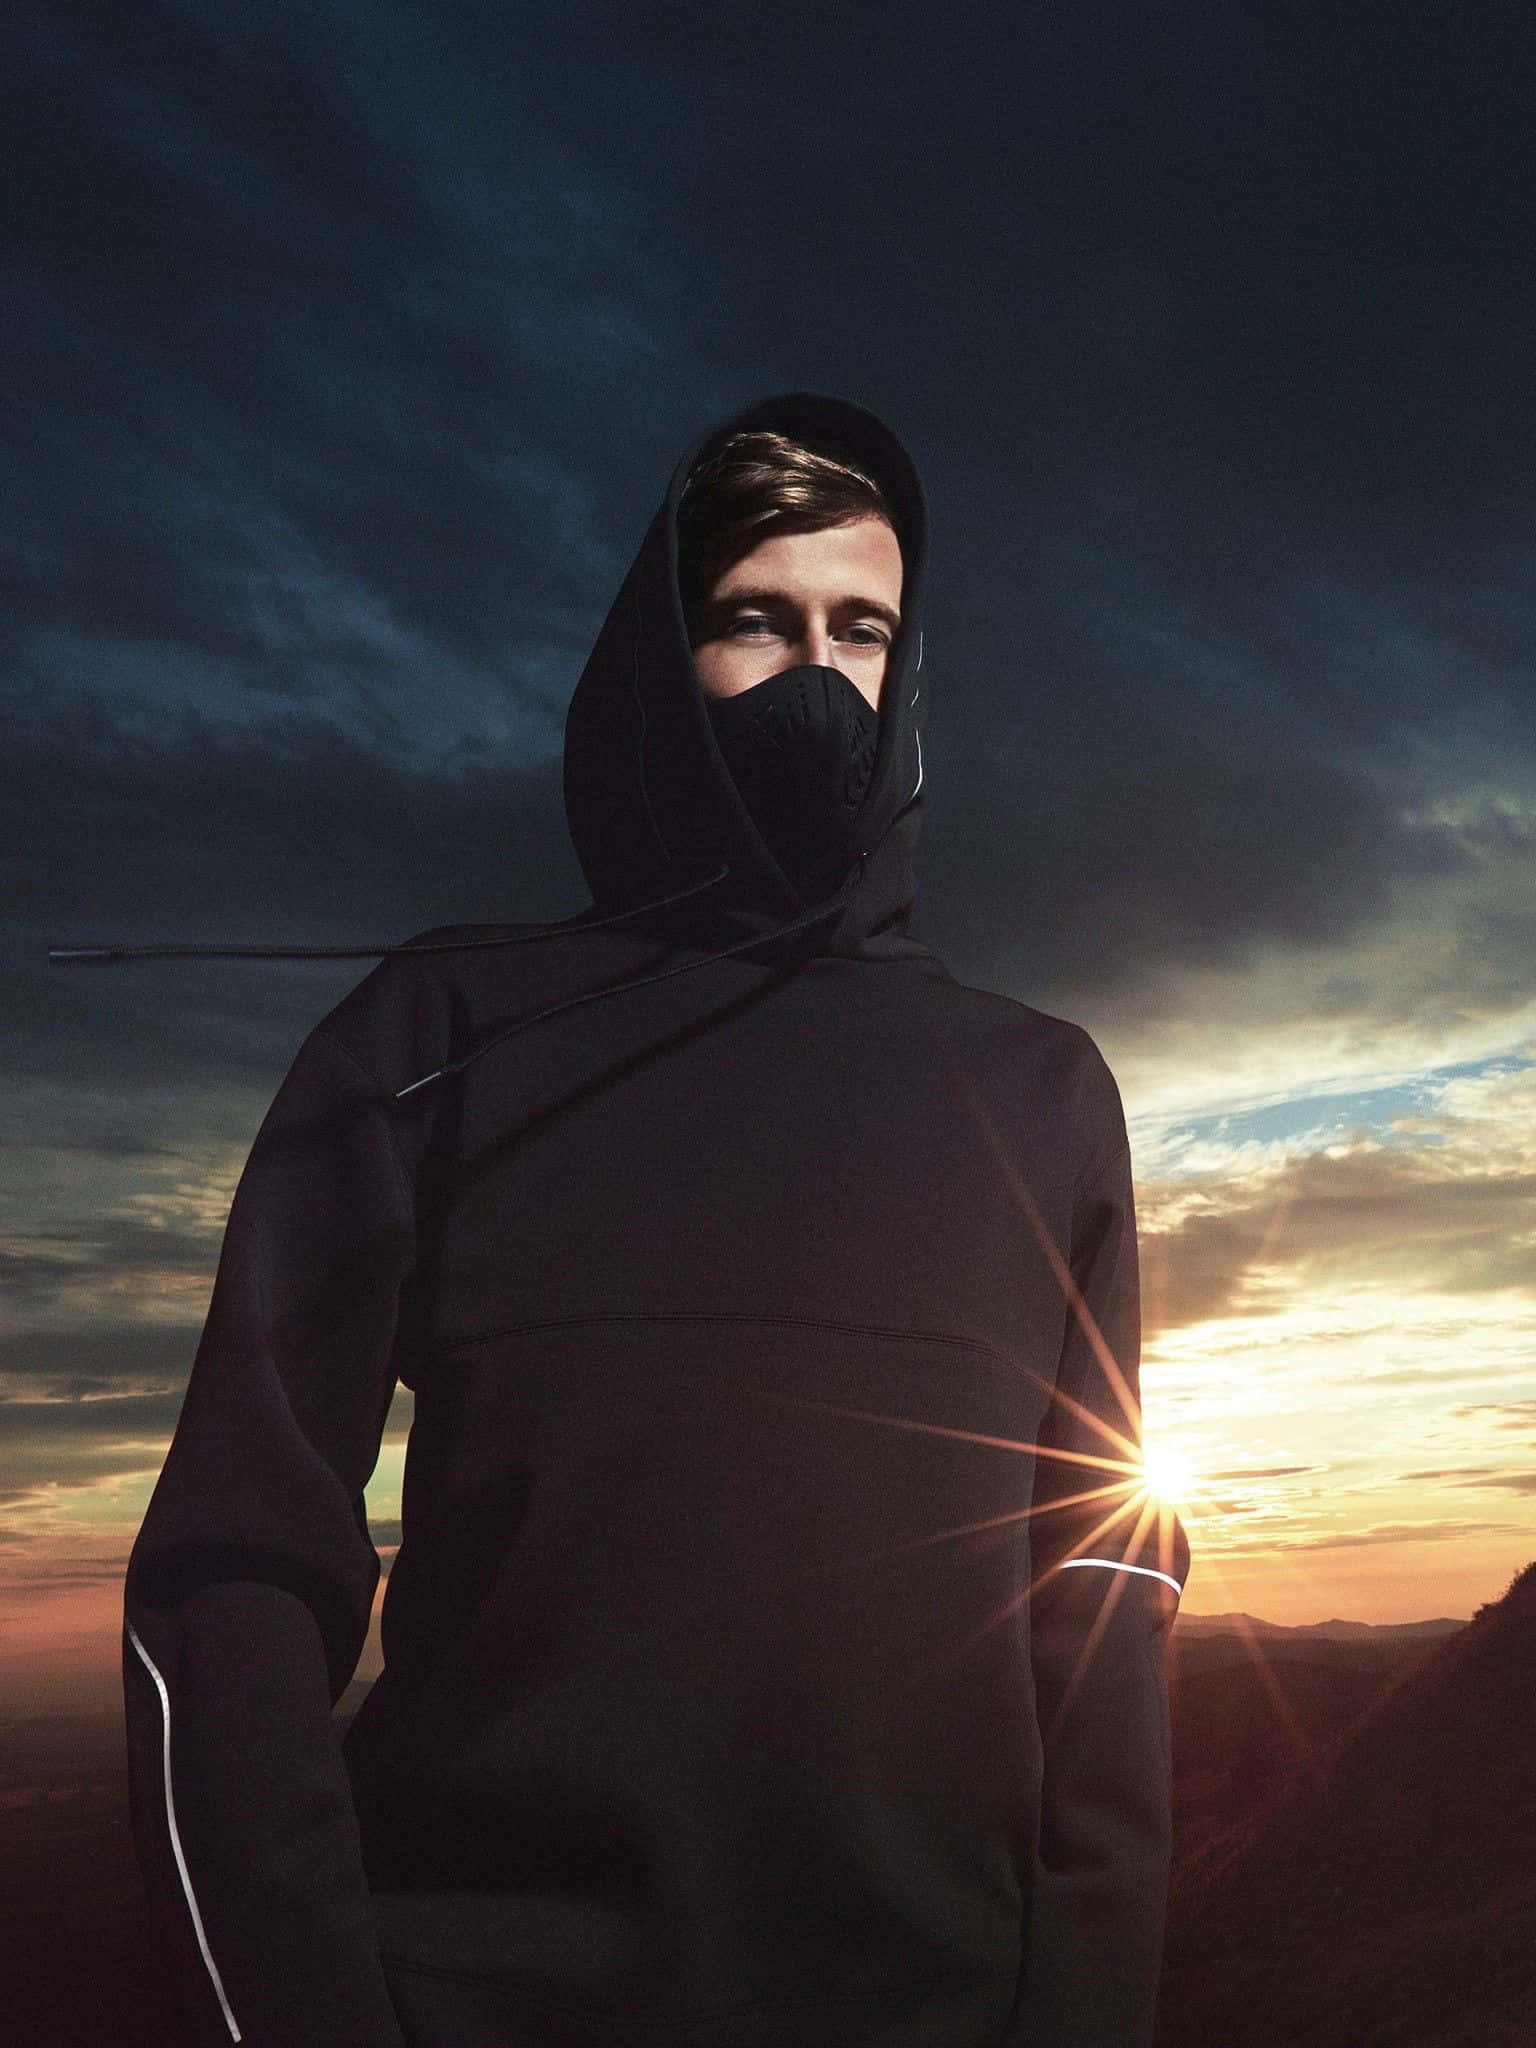 Alan Walker performing live on stage with a vibrant background